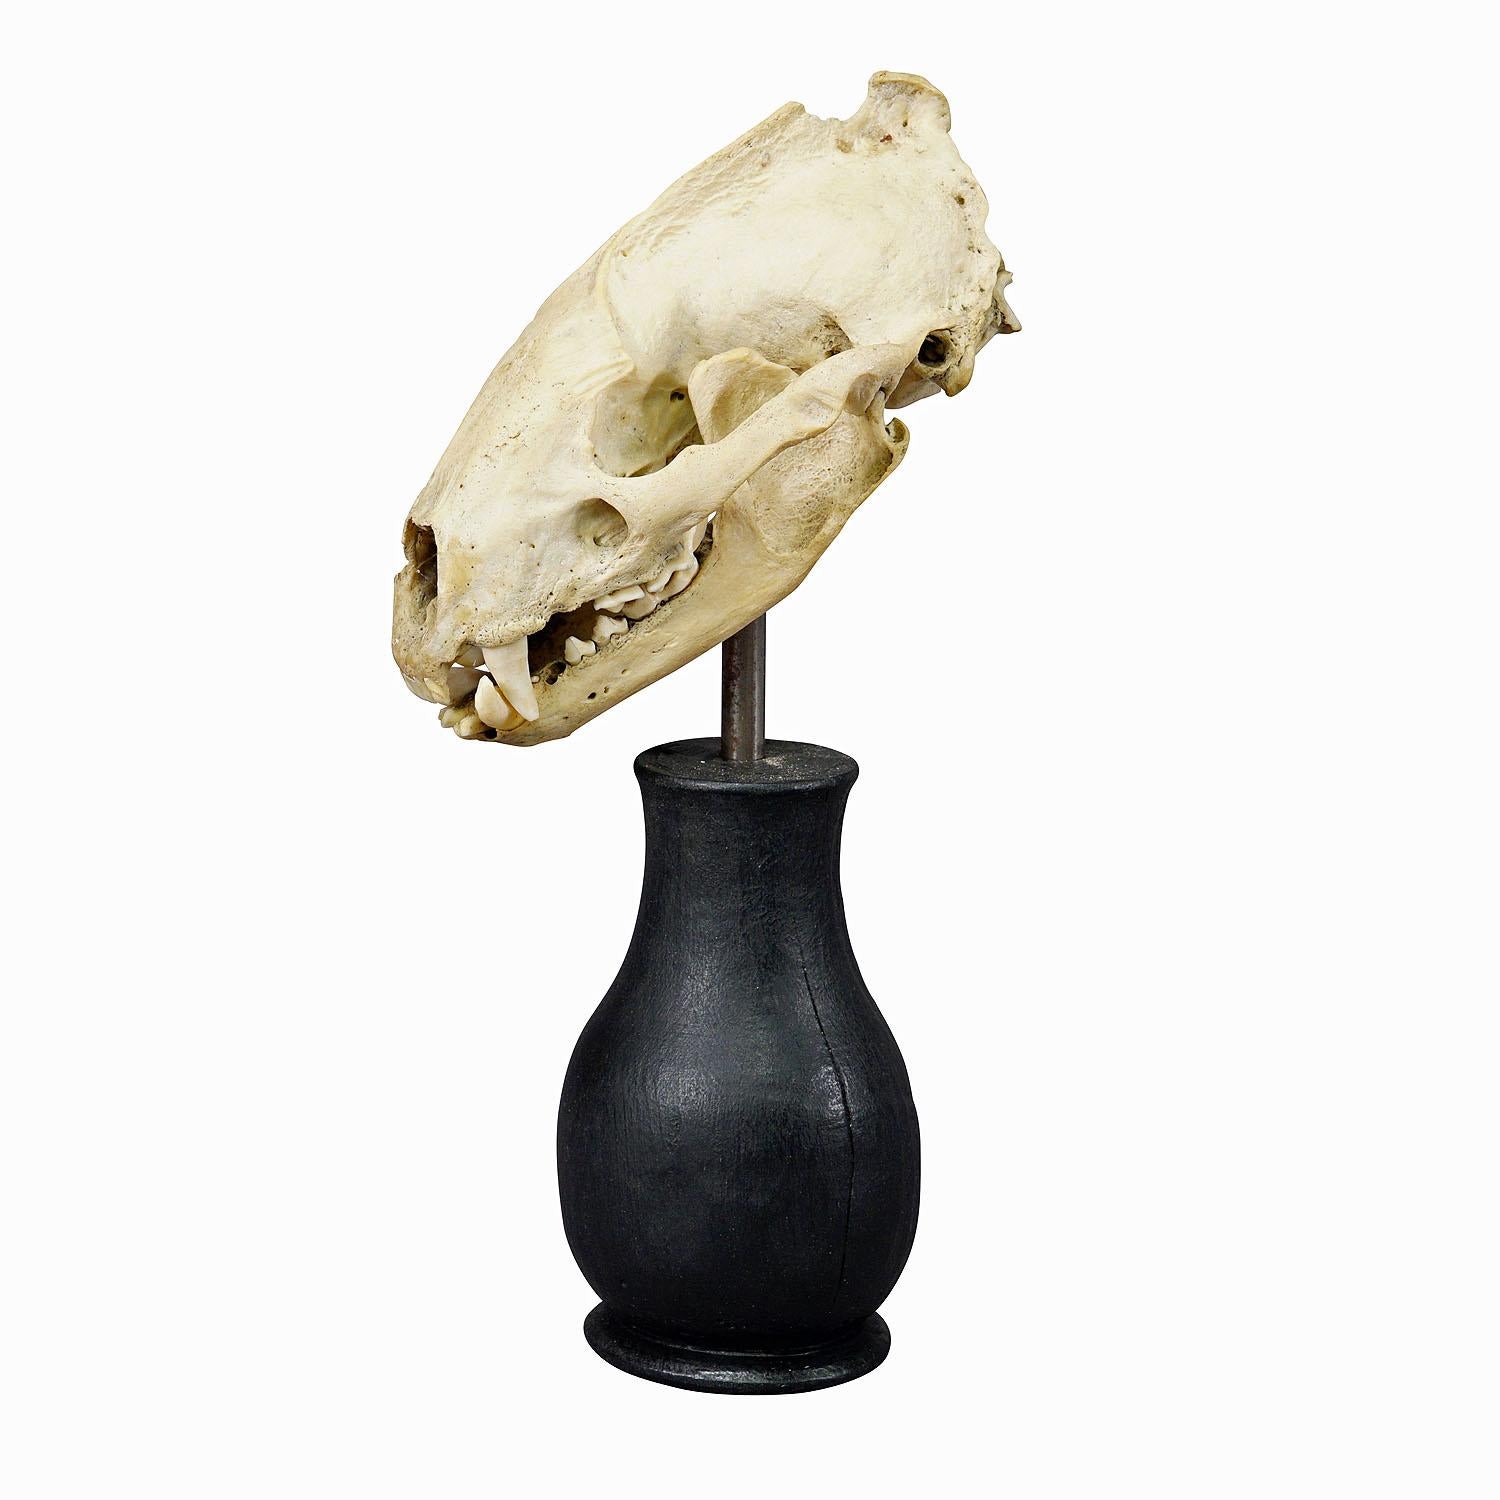 Antique Real Skull of a Badger, Germany ca. 1900s

An antique taxidermied skull of the badger (Meles meles) mounted on an ebonized wooden turned base. Derived from the biological collection of monastery Weissenhorn in Southern Germany. 

This